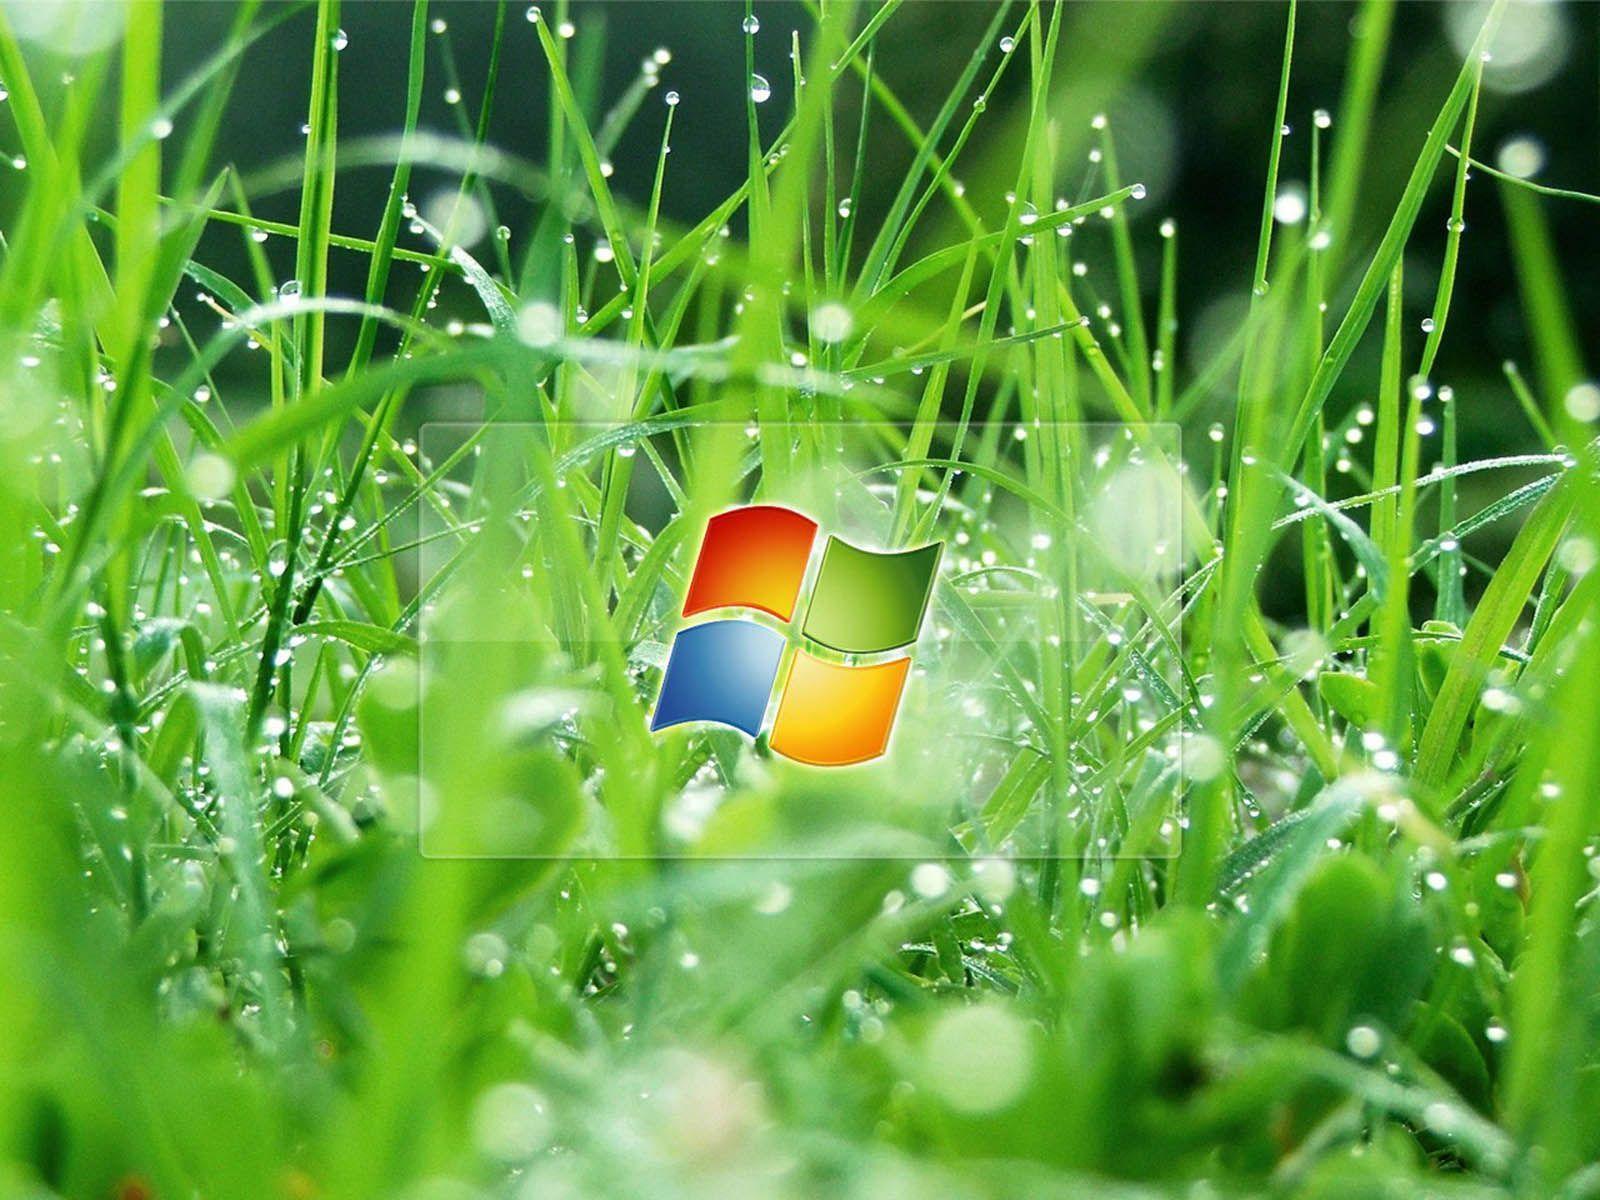 wallpaper: Windows XP Wallpaper And Background